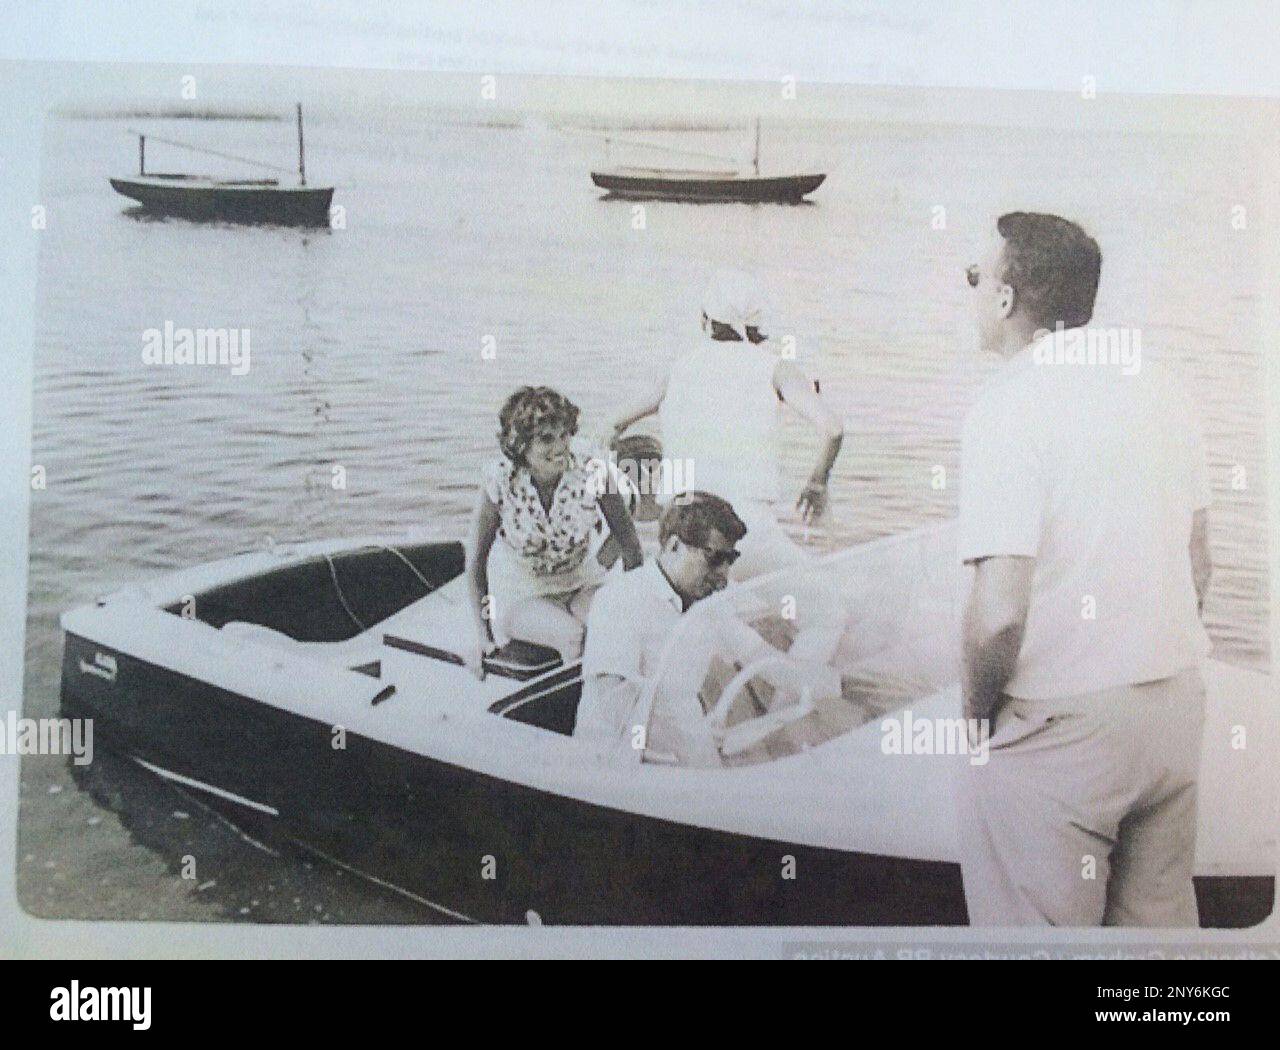 FILE- In this undated file photo provided by Guernsey's, John F. Kennedy is at the wheel of his speedboat, Restofus. Hot memorabilia with a Cold War theme, including property of the late President John F. Kennedy and CIA pilot Francis Gary Powers, is being featured at an auction in New York City on Saturday, Oct. 7, 2017. (Guernsey's via AP) Banque D'Images